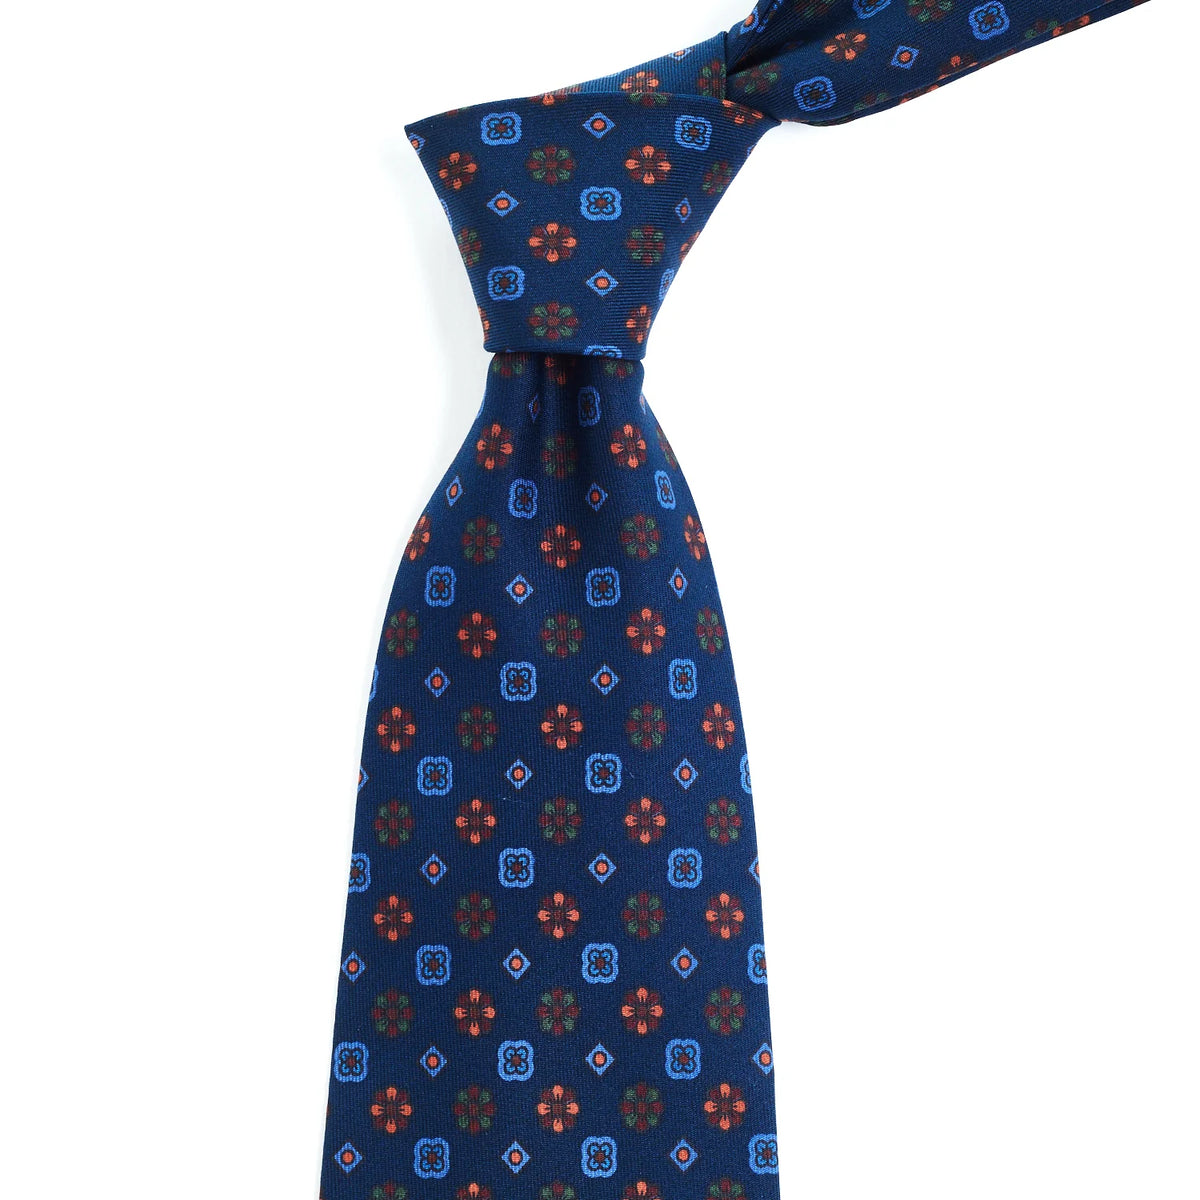 A high-quality Sovereign Grade Blue Mixed Floret Ancient Madder Tie with a handmade red and blue pattern from the United Kingdom, brought to you by KirbyAllison.com.